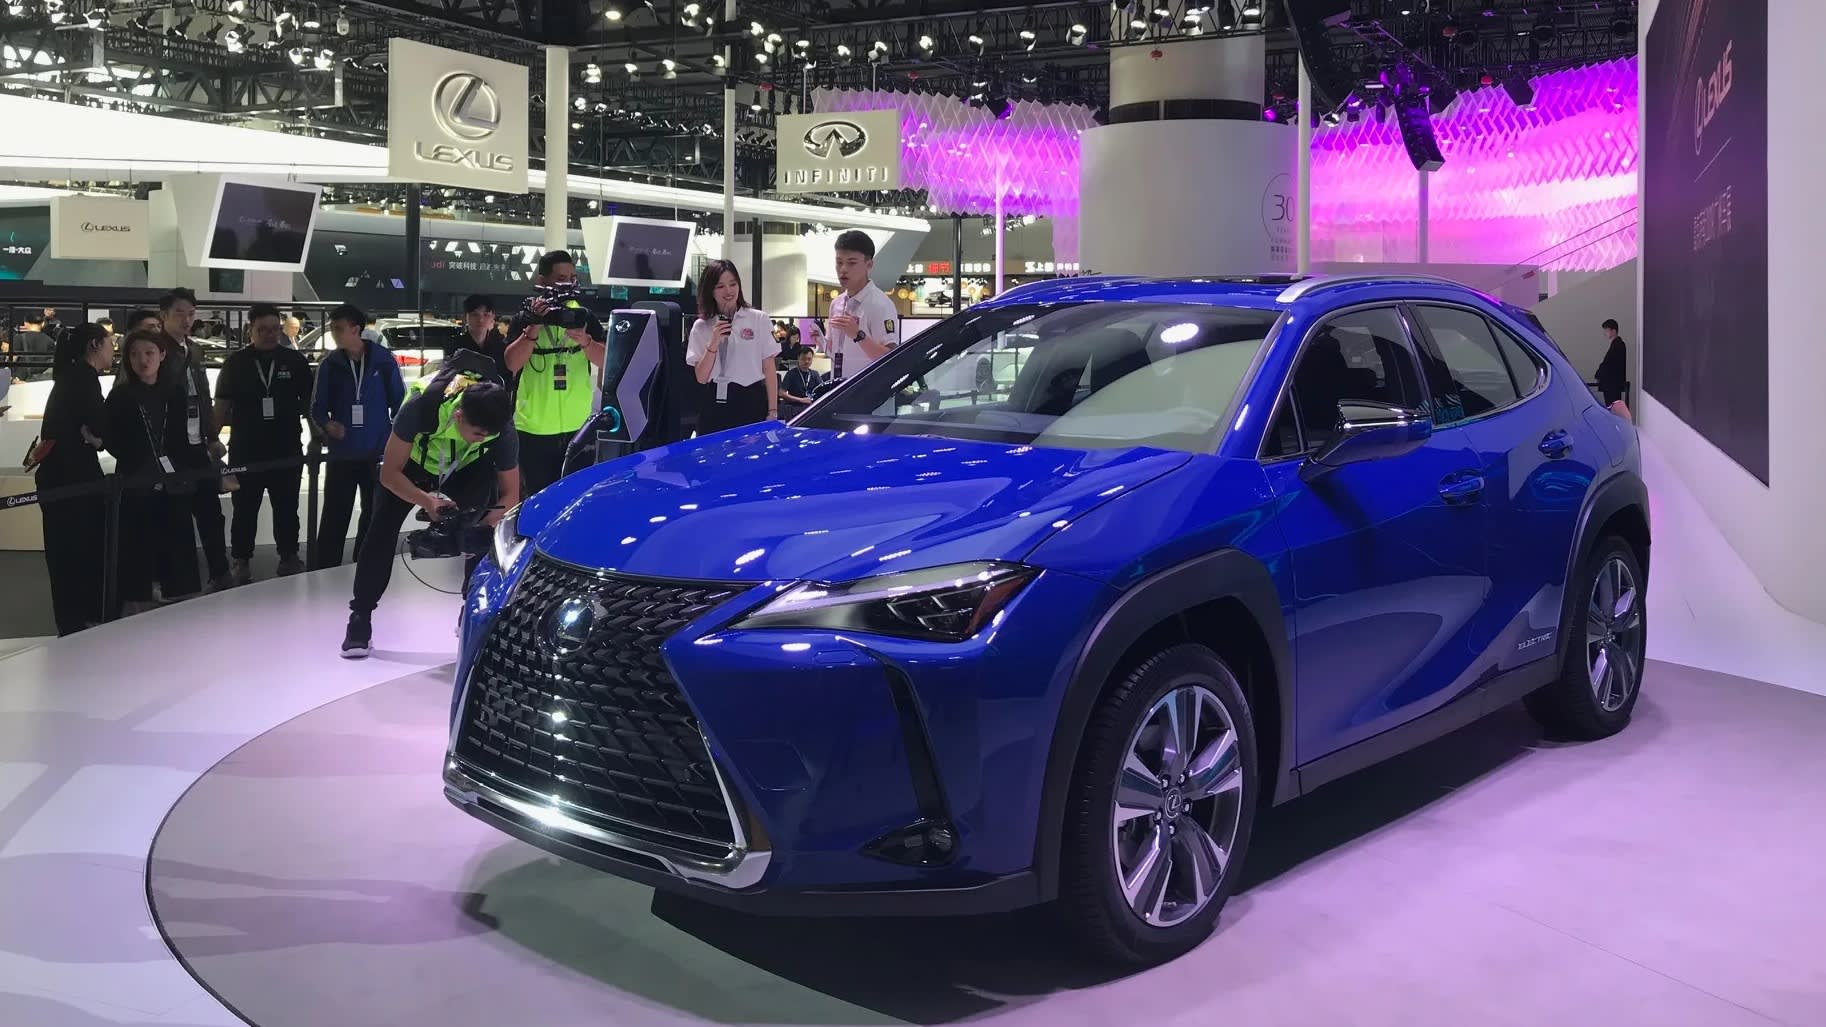 Toyota Motor is ramping up efforts to sell electric vehicles in China, the world's largest auto market, where it plans to launch its first electric Lexus in 2020